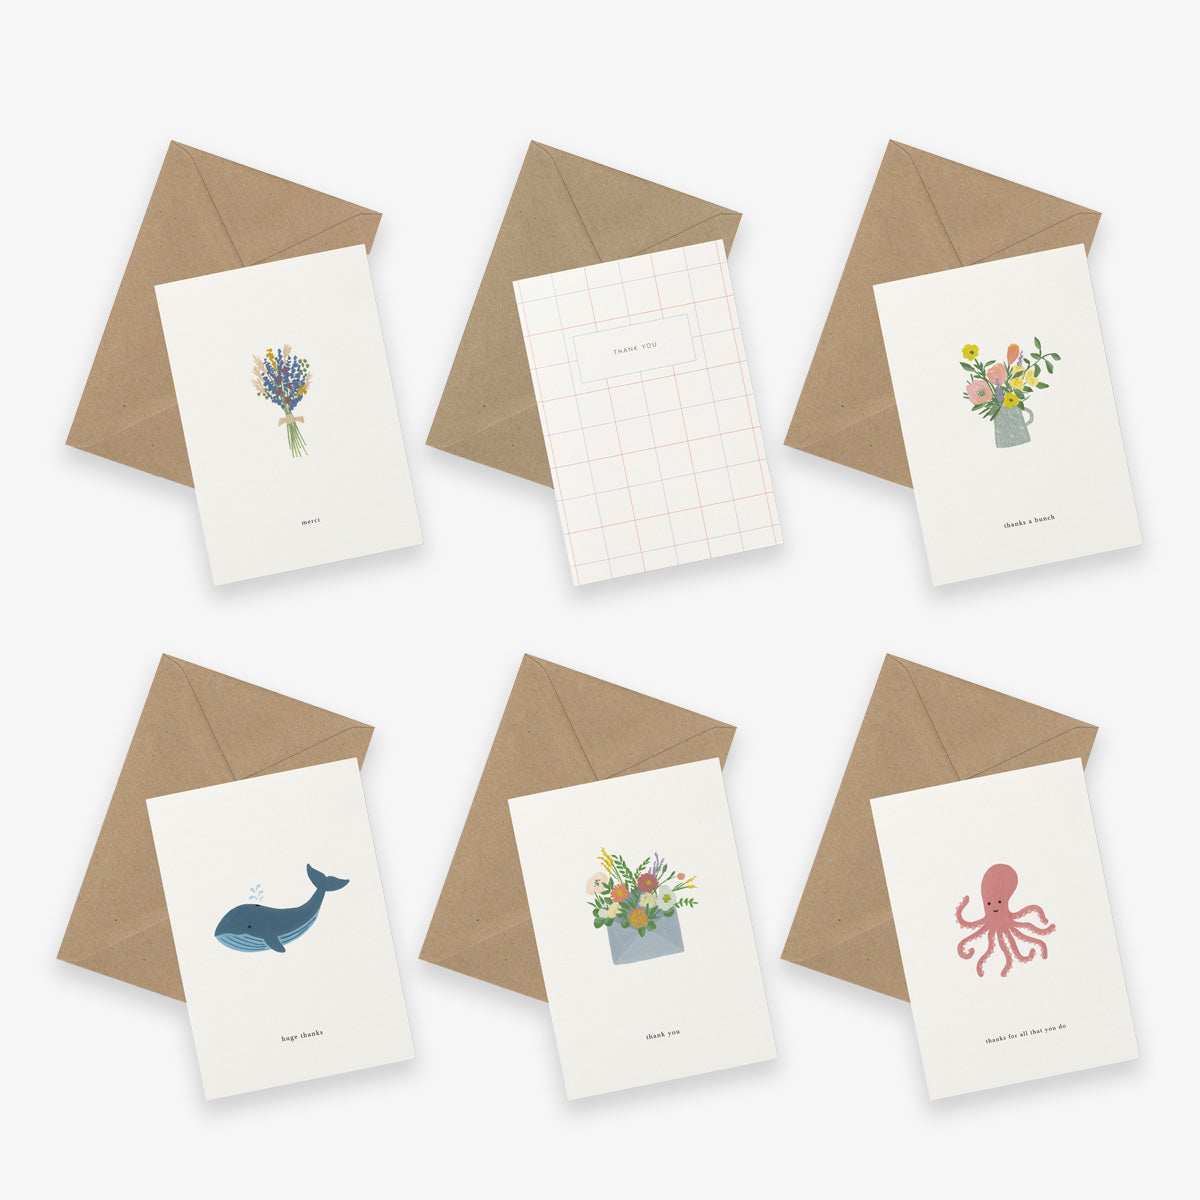 GREETING CARD SET OF 6 // THANK YOU